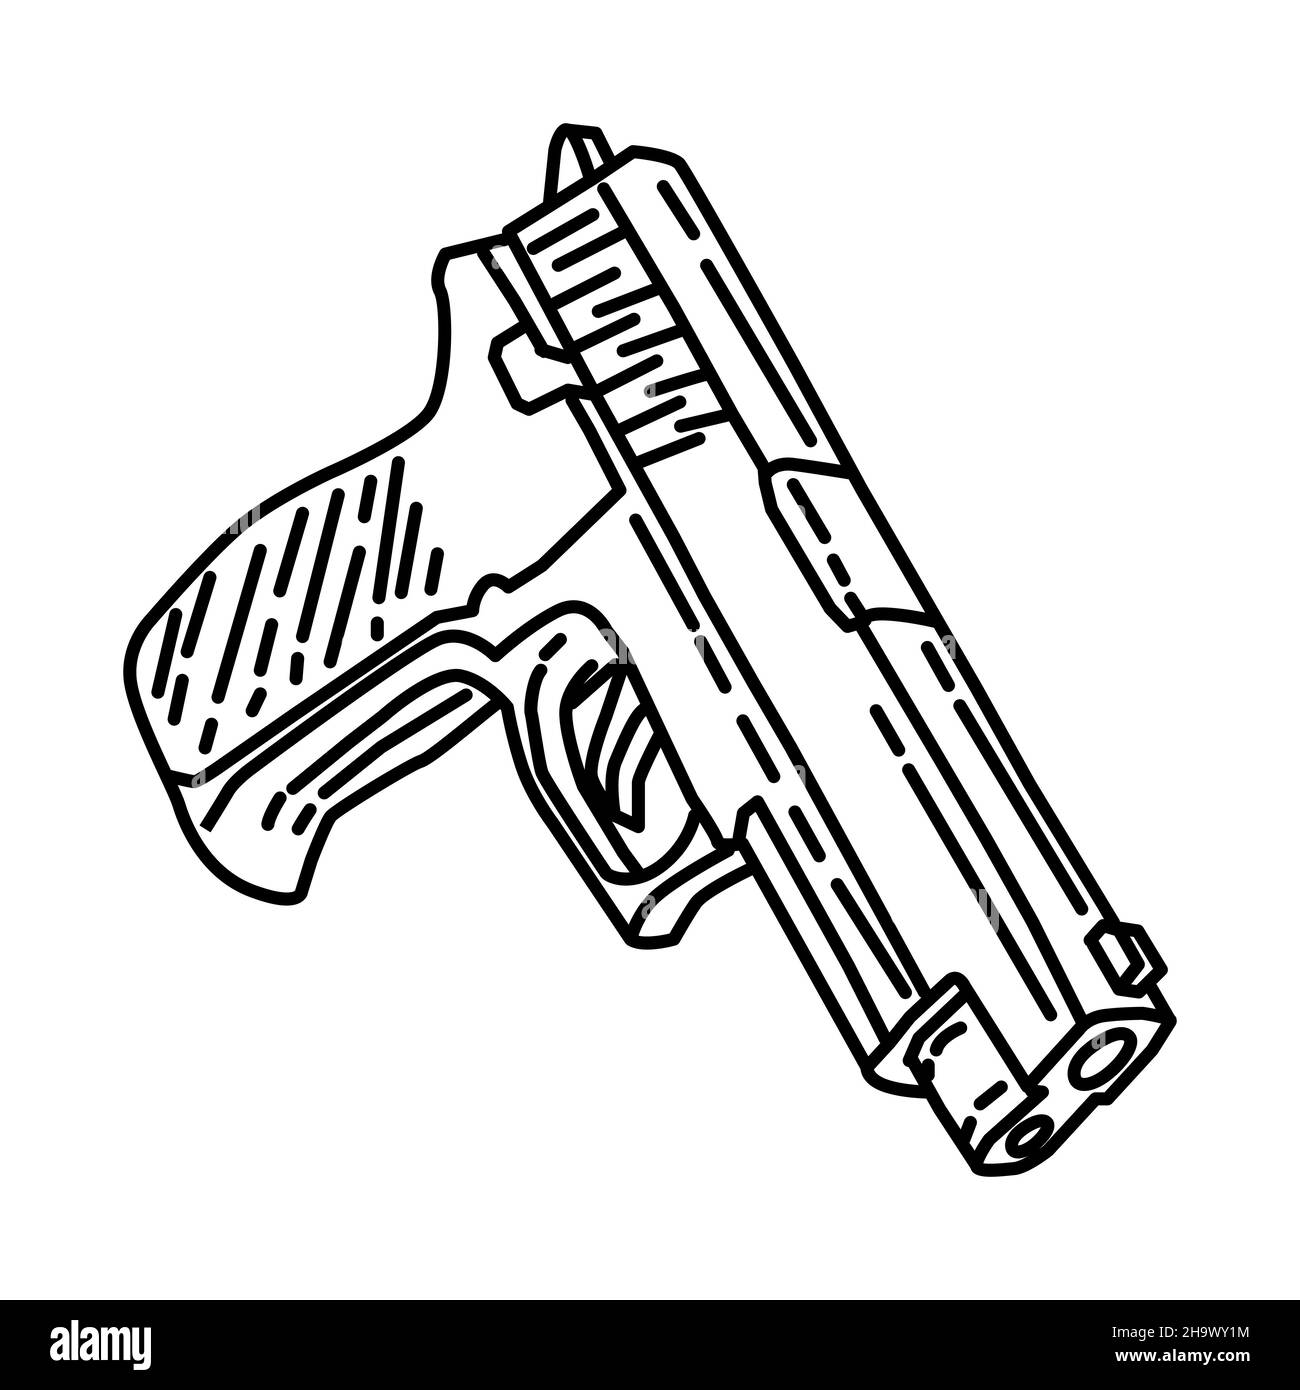 Navy Seal Handgun Part of Military and Navy Force Equipments Hand Drawn Icon Set Vector. Stock Vector